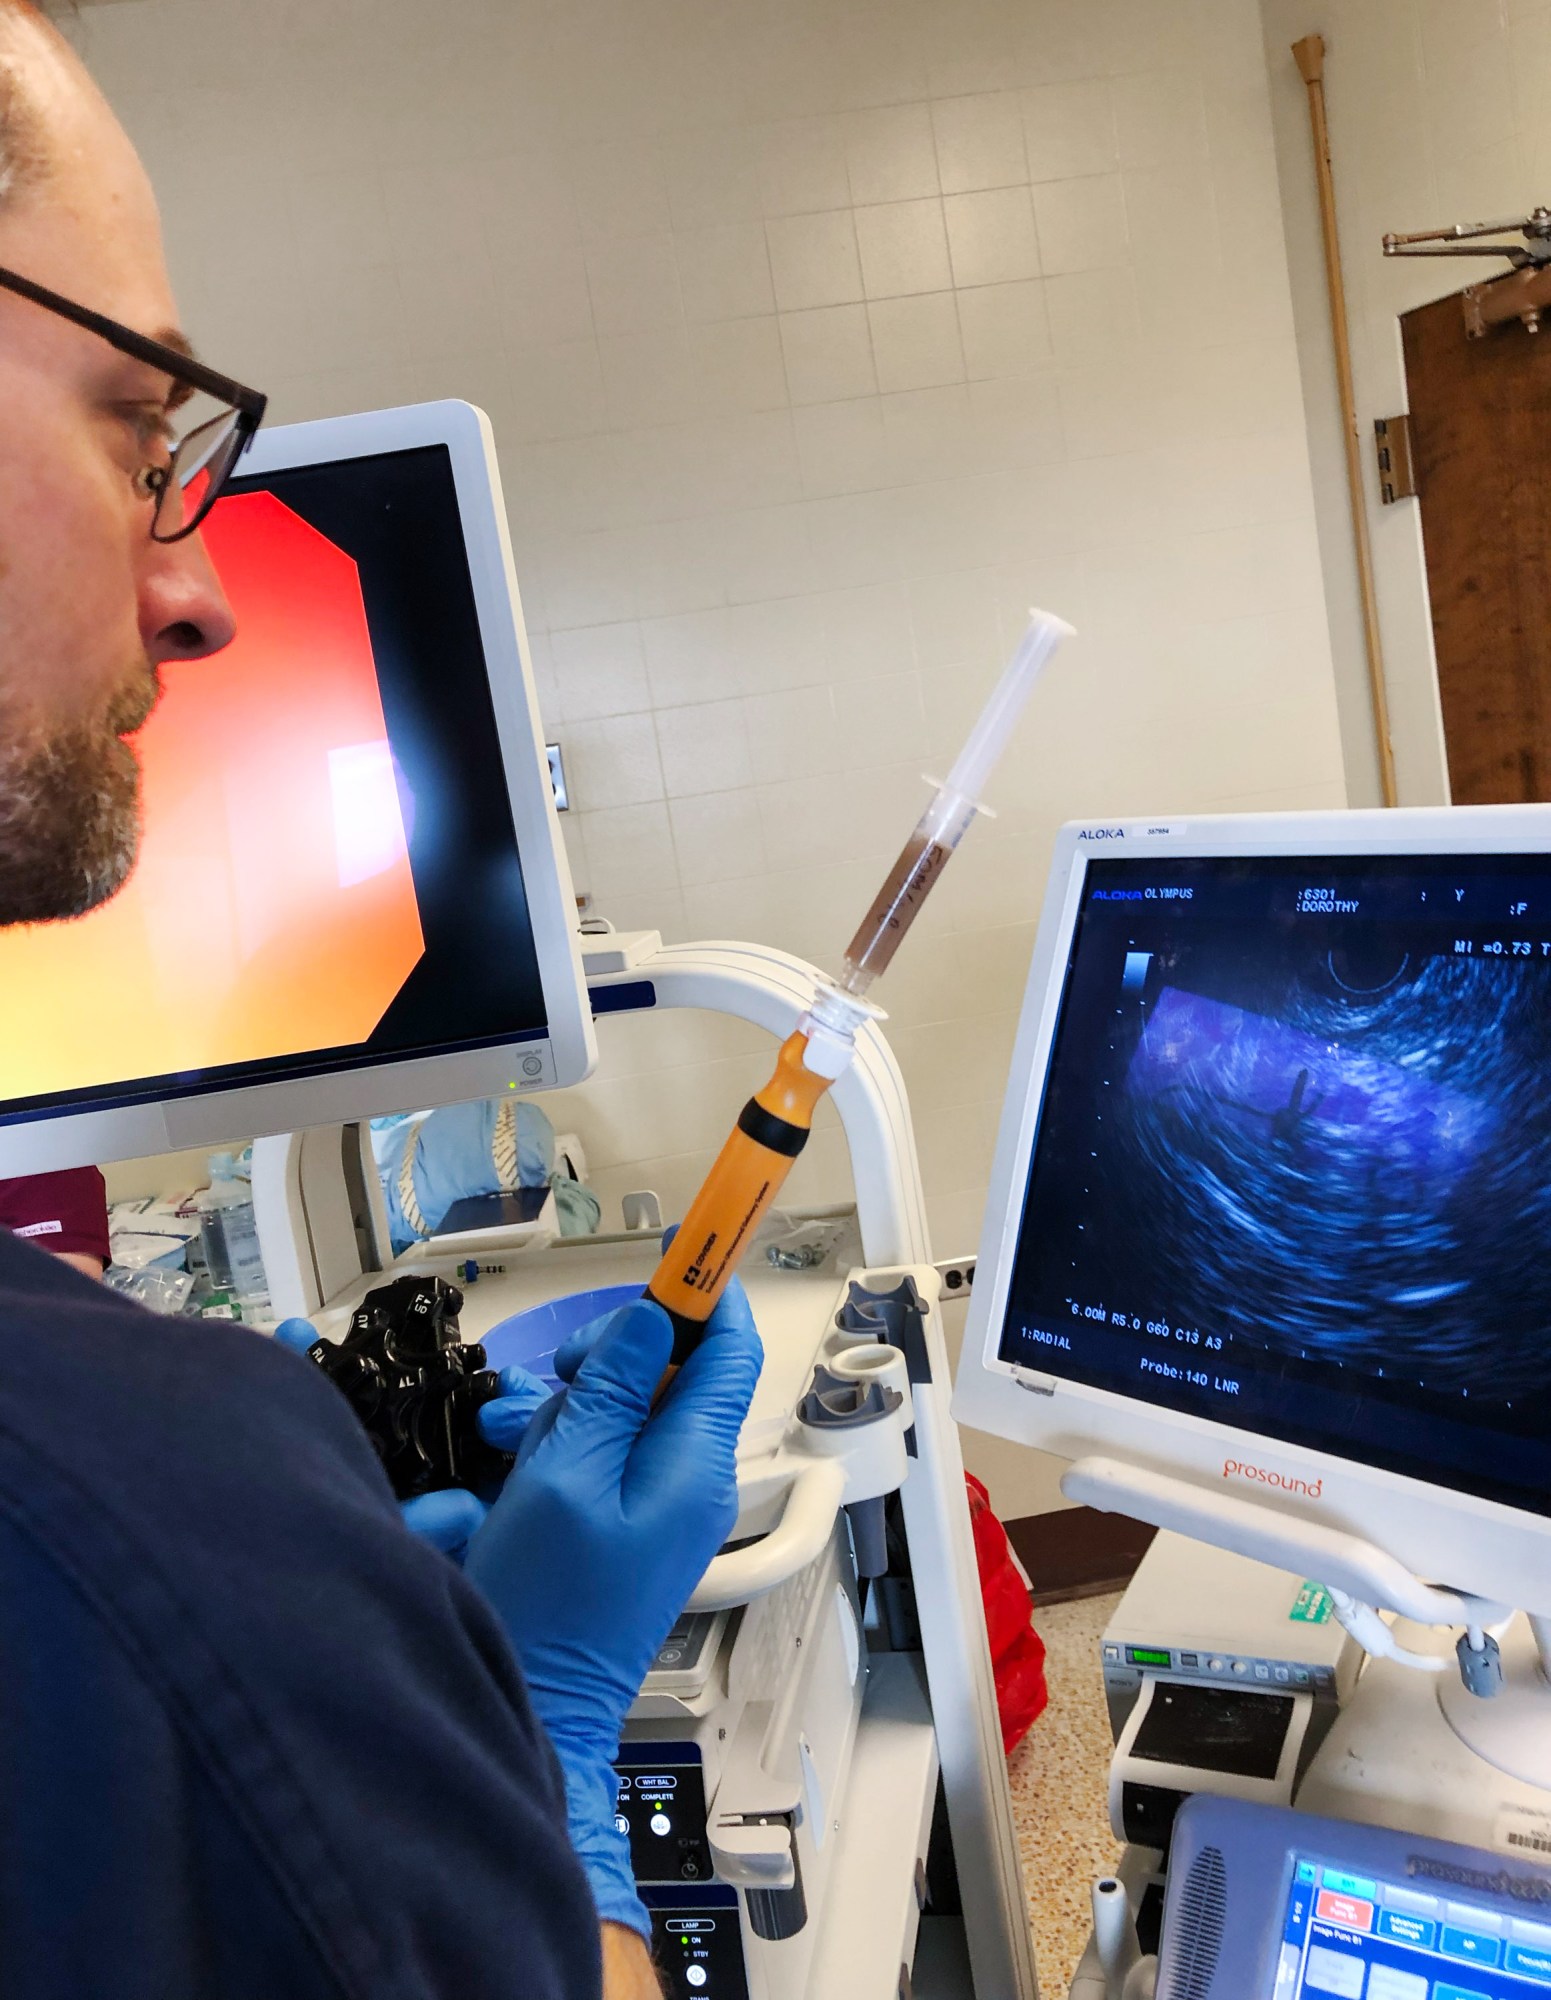 researcher holding a syringe and watching an ultrasound machine